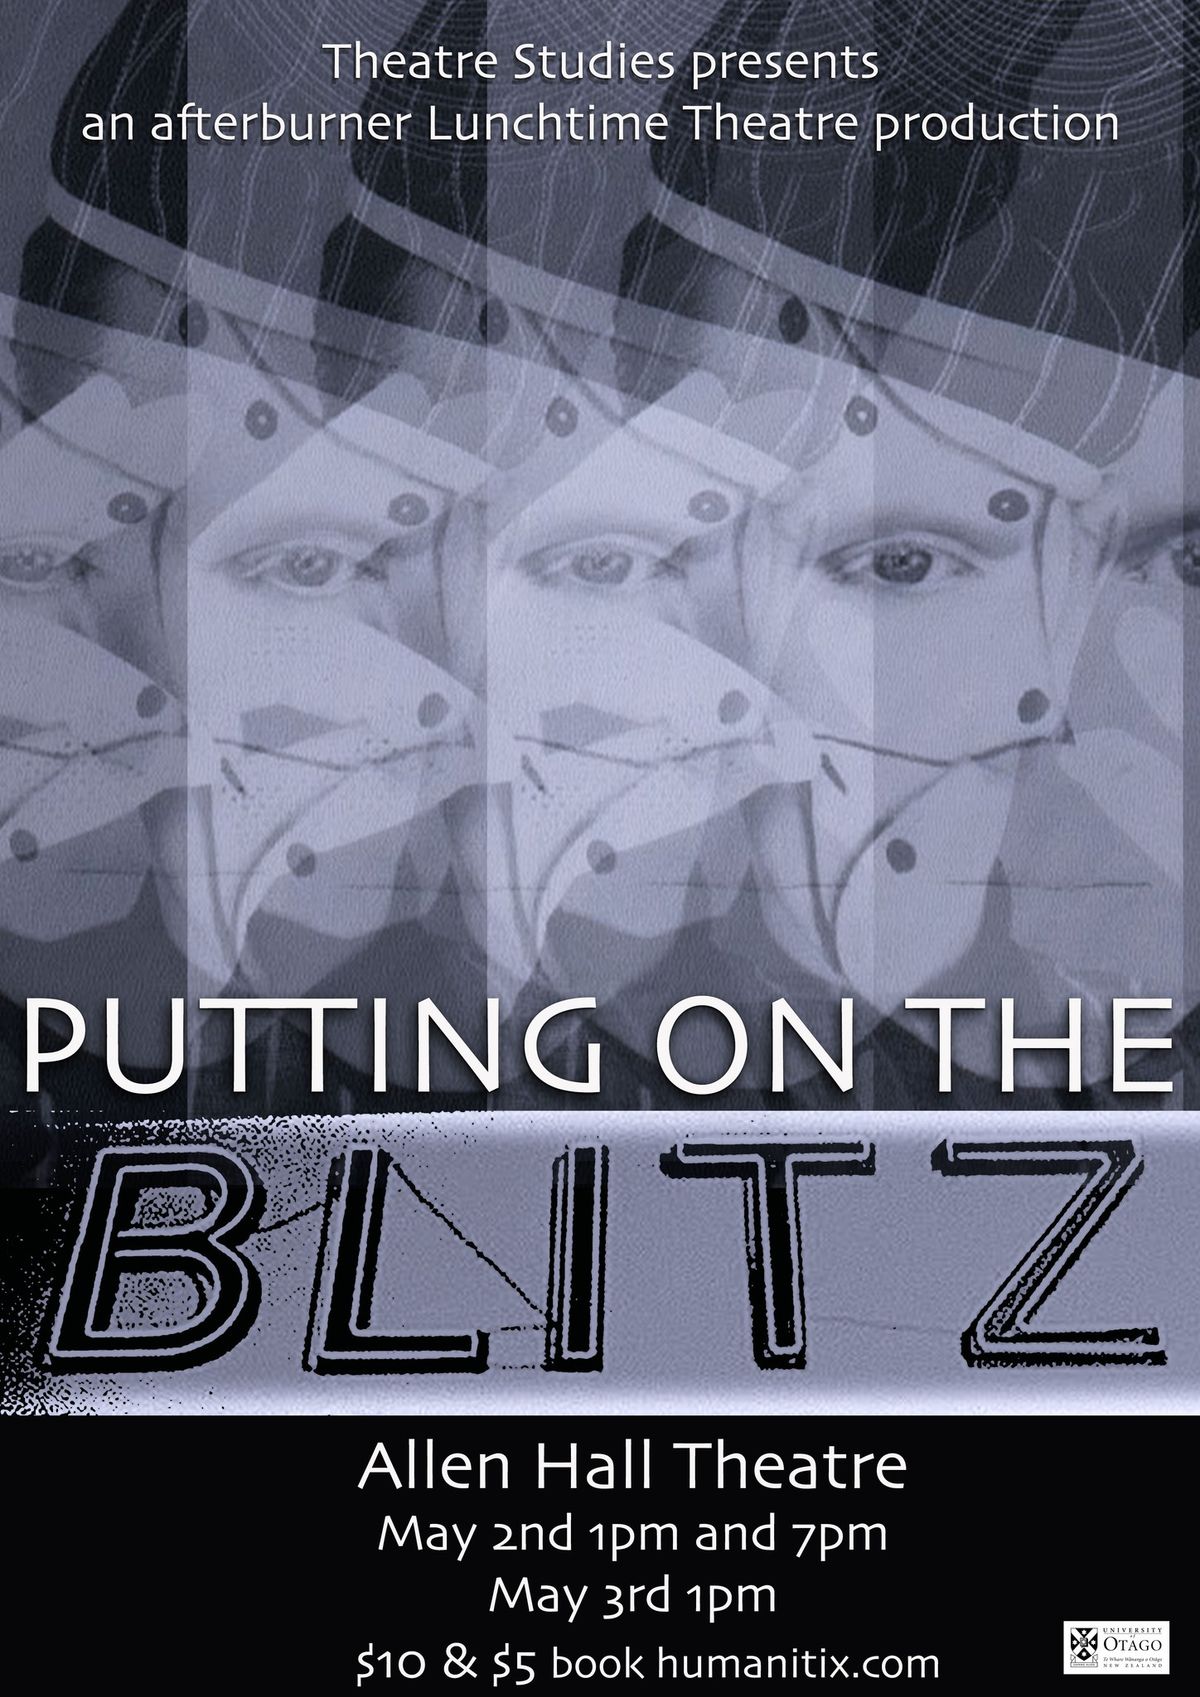 Putting on the Blitz